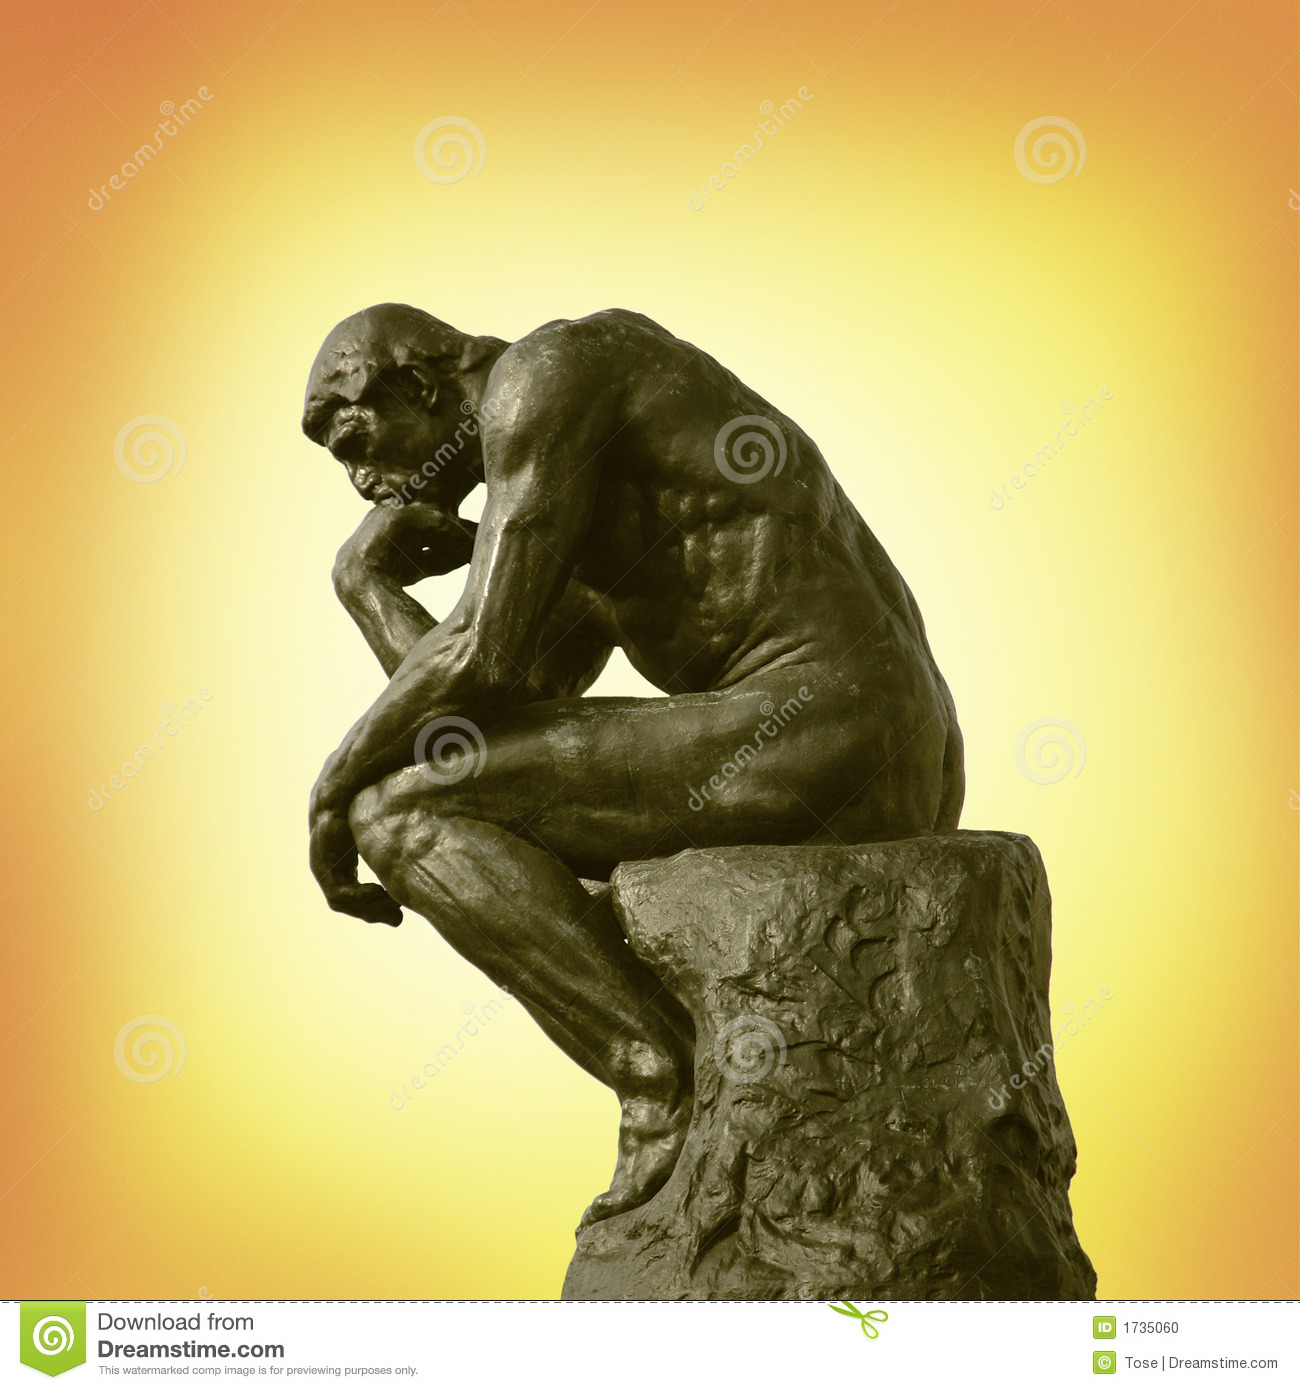 Isolated The Thinker Statue On A Yellow Gradient